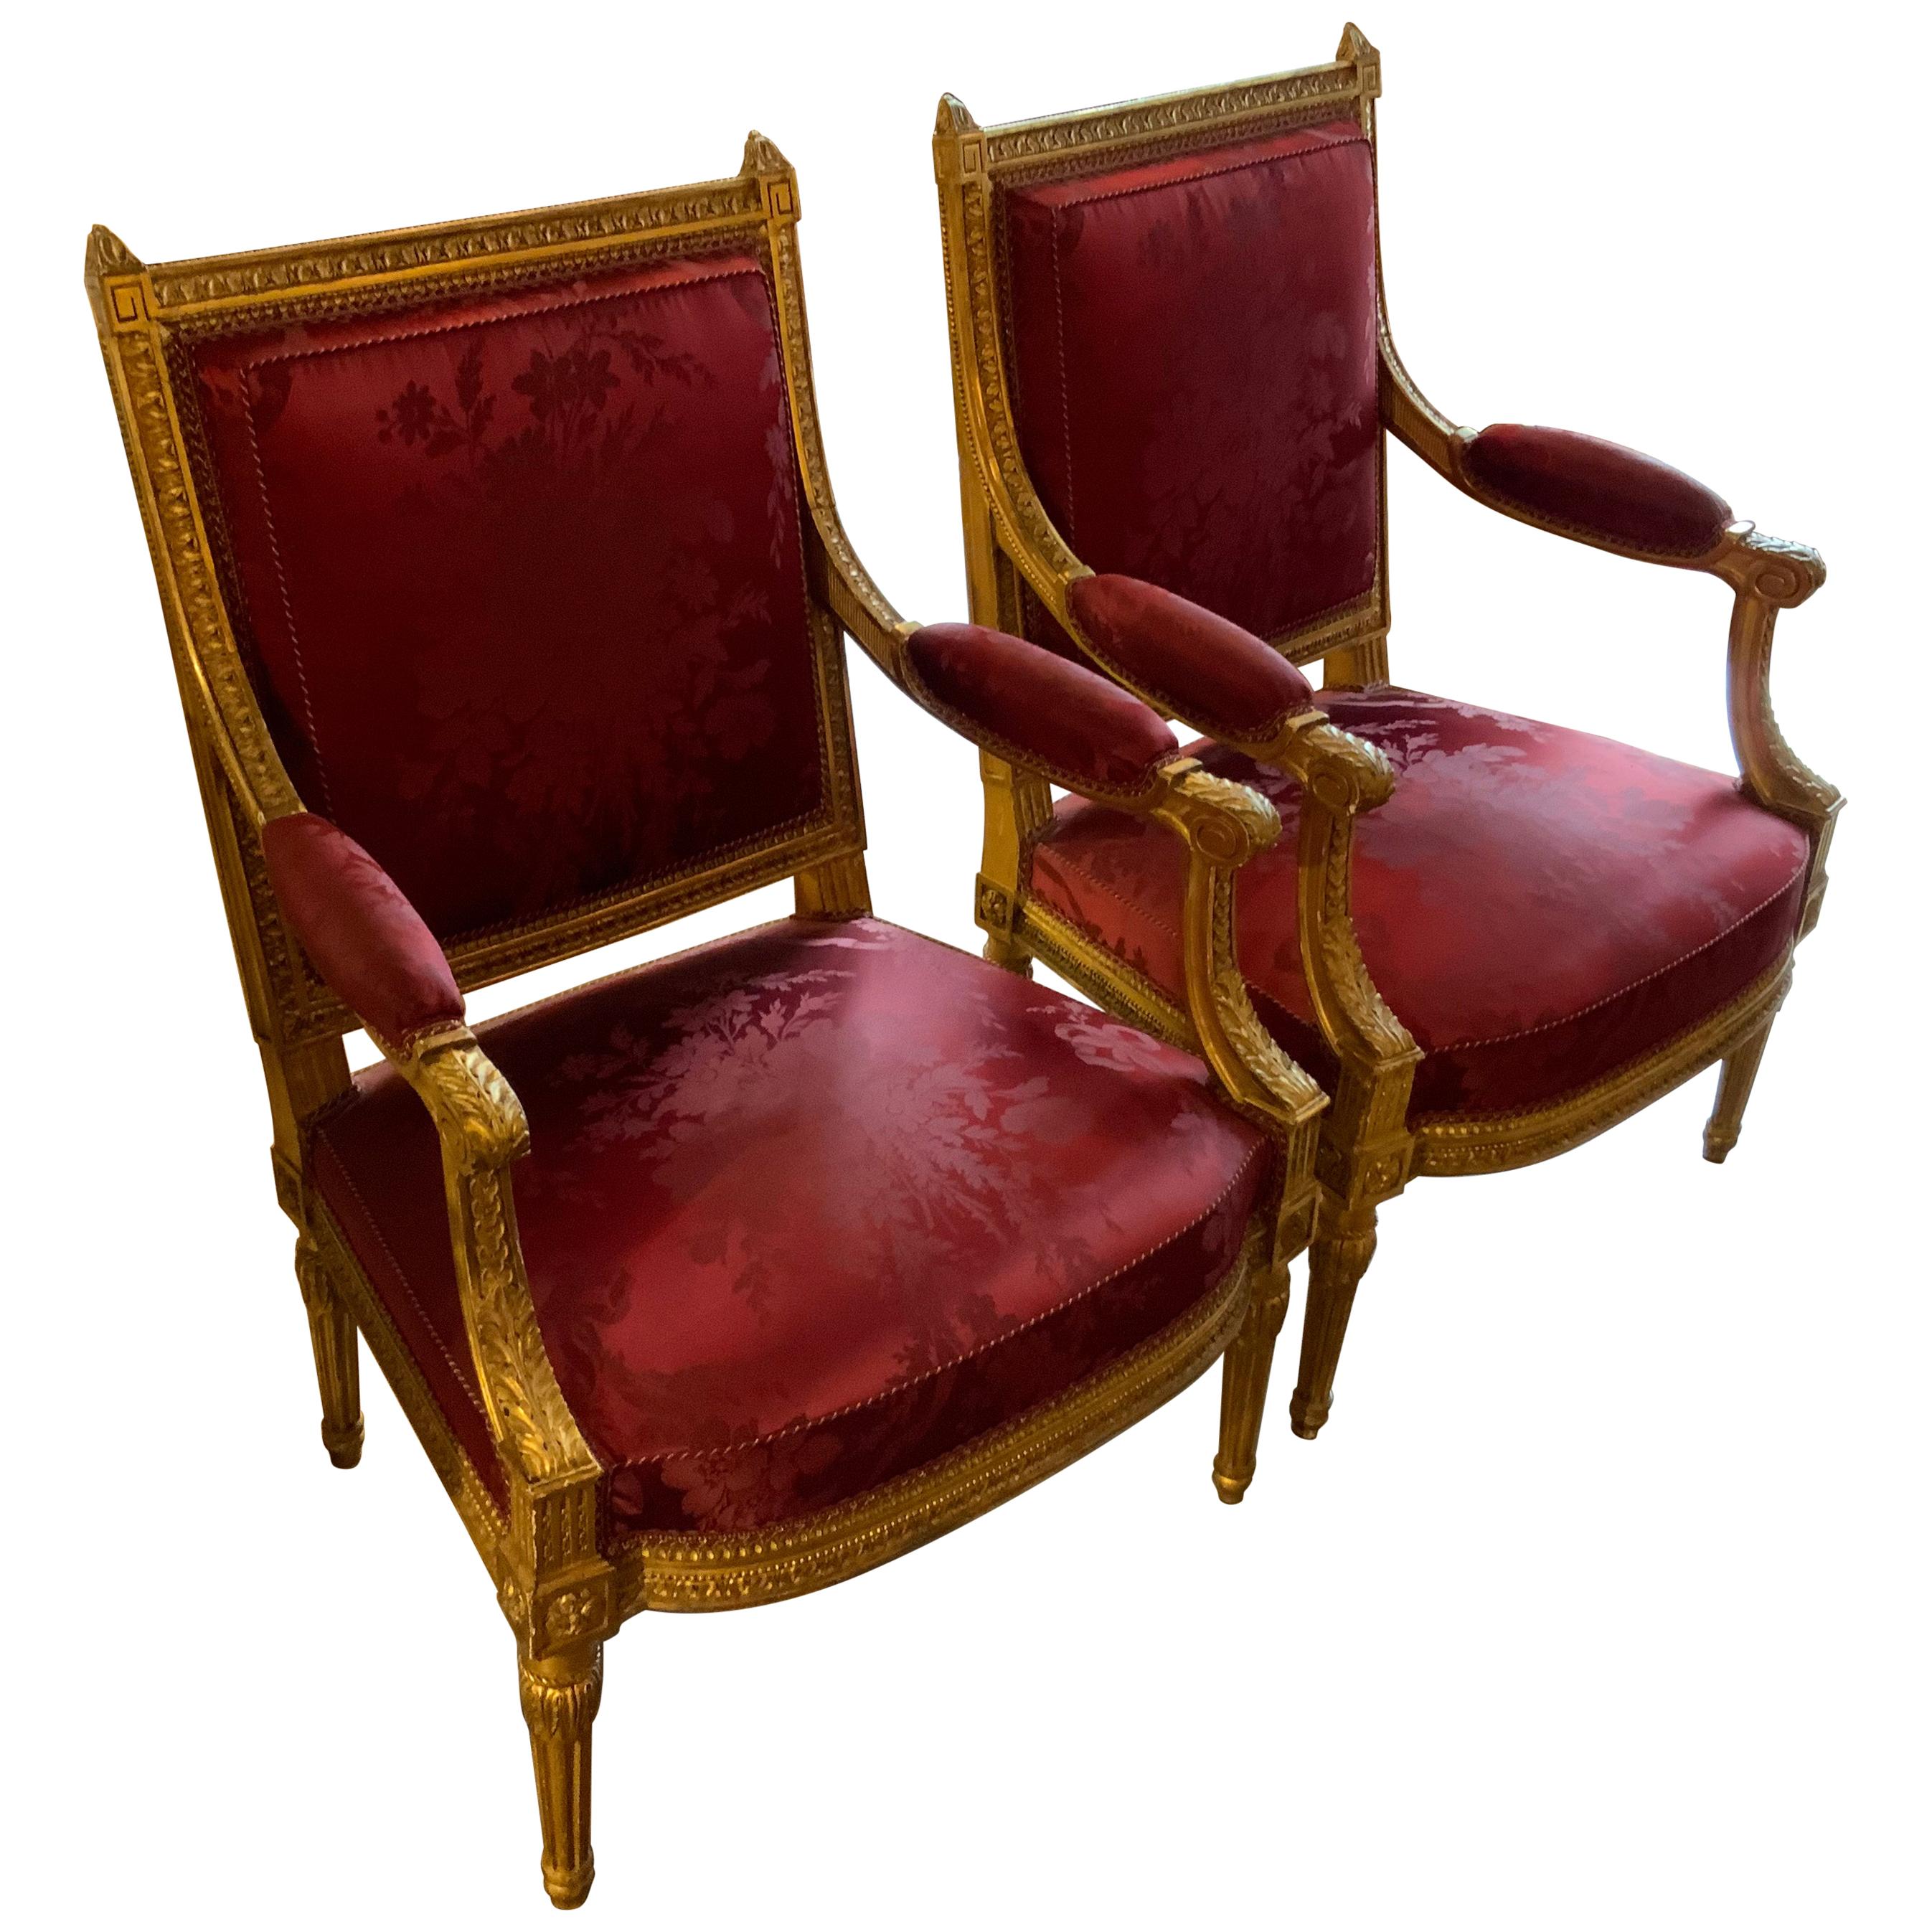 Pair of Exceptional Gilt Carved Wood French Armchairs/Fauteuils Louis XVI